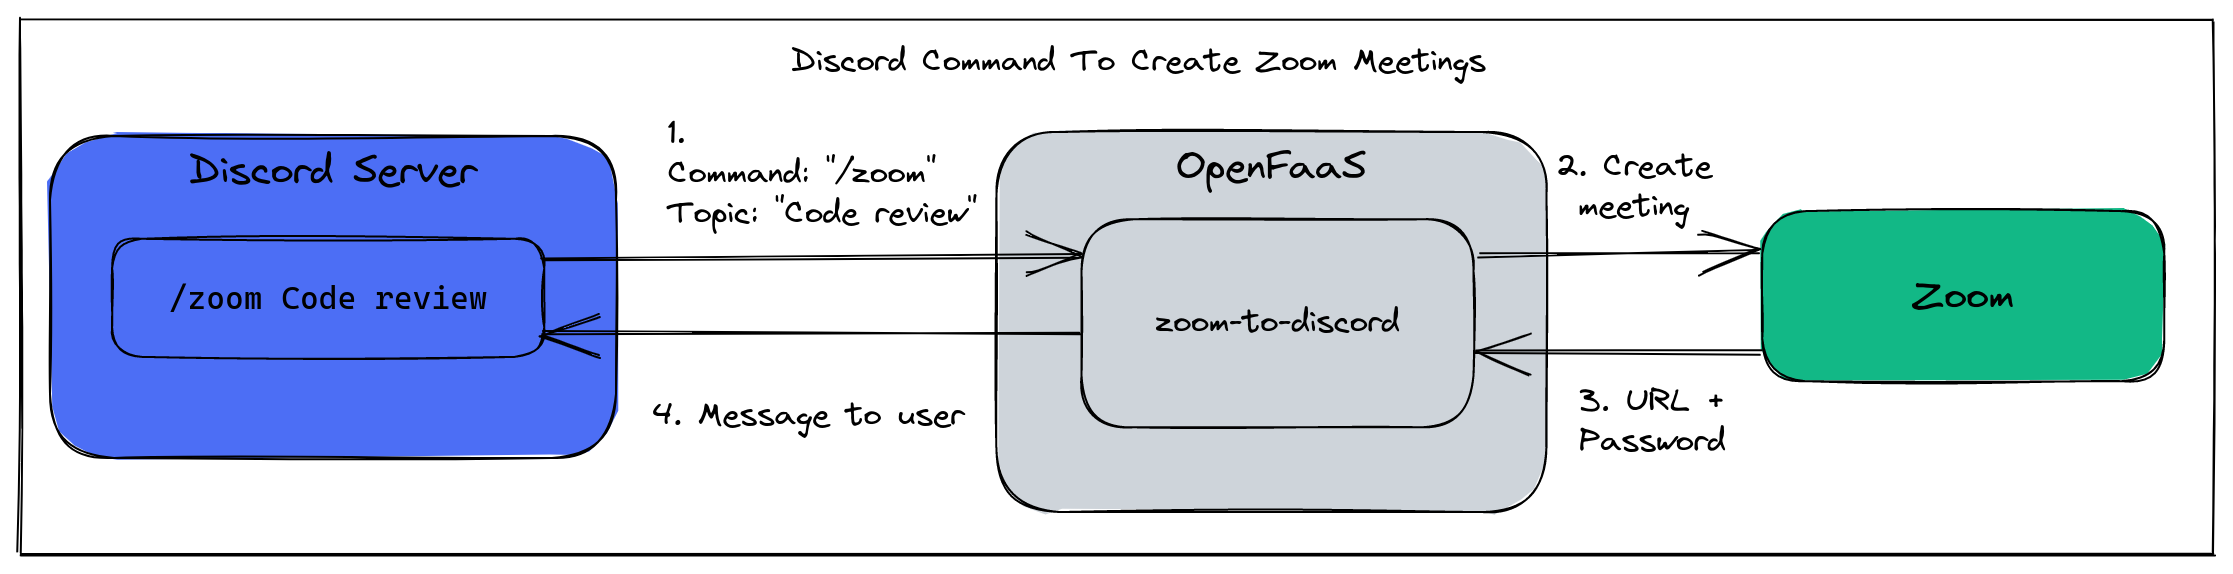 Conceptual architecture for the Discord to Zoom bot